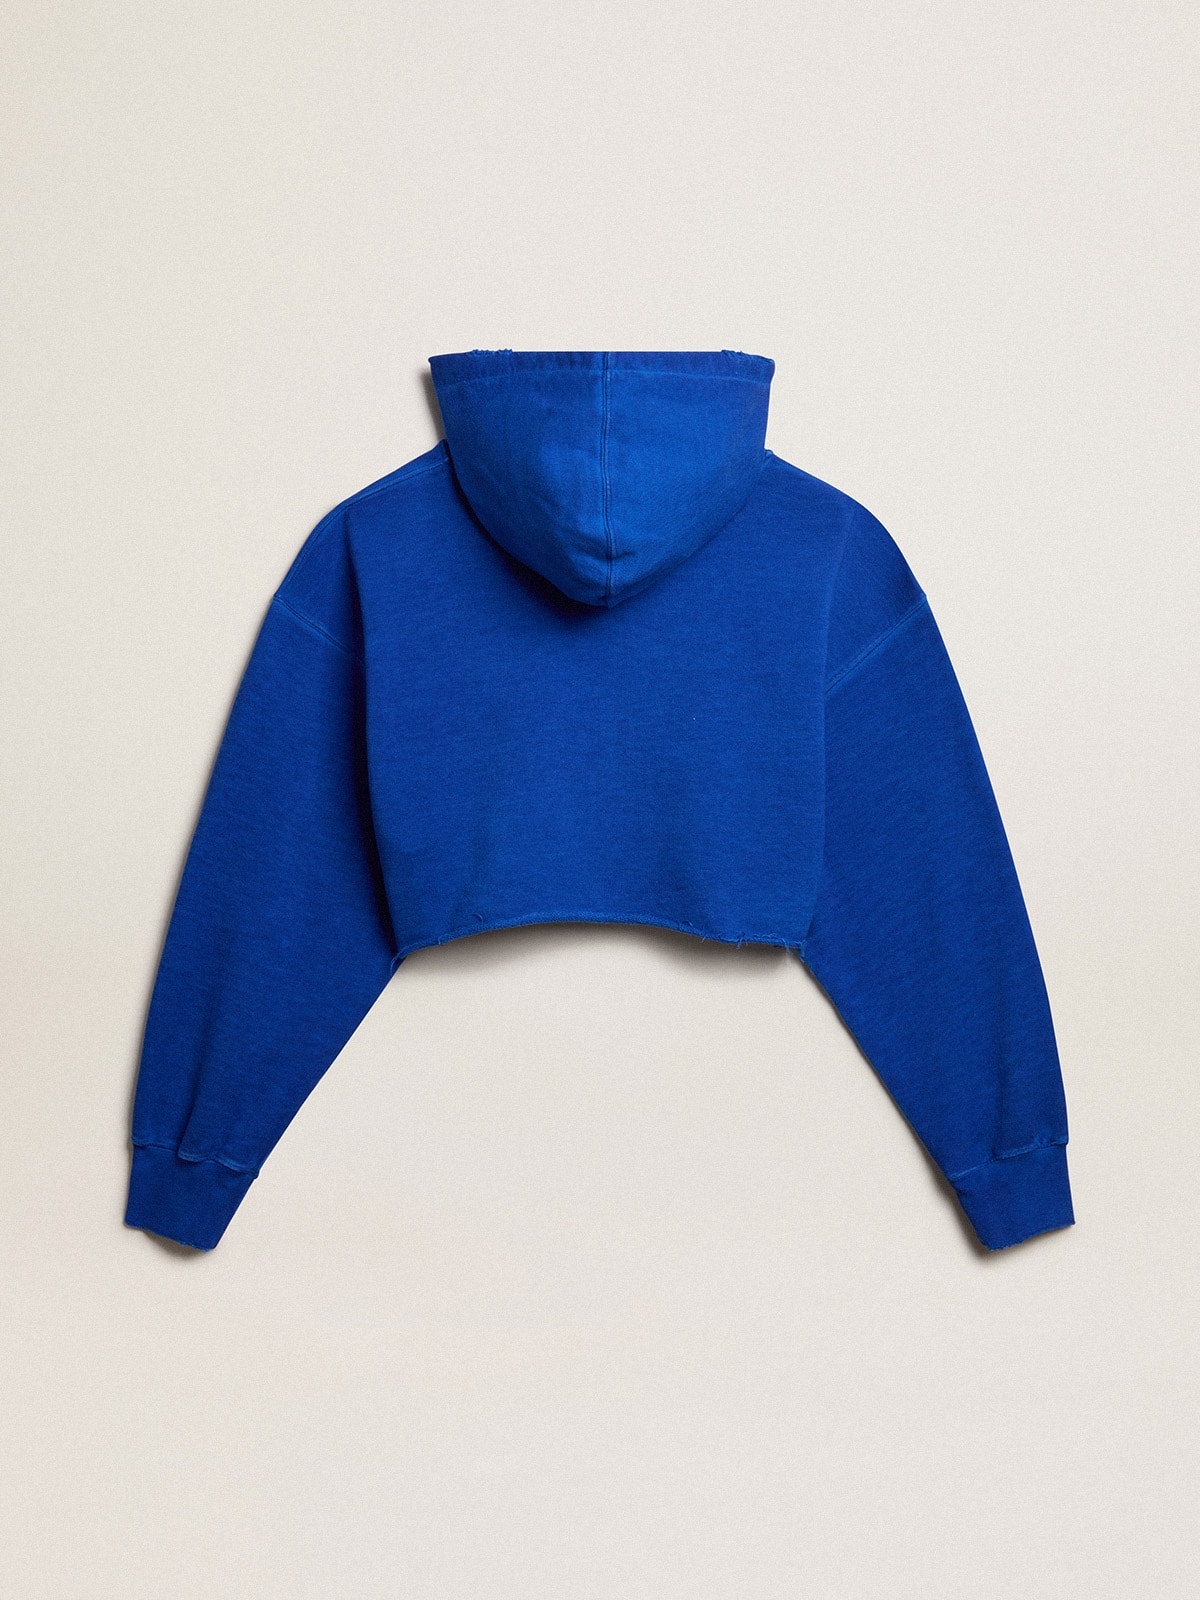 Blue cropped sweatshirt with zip fastening and hood - 2